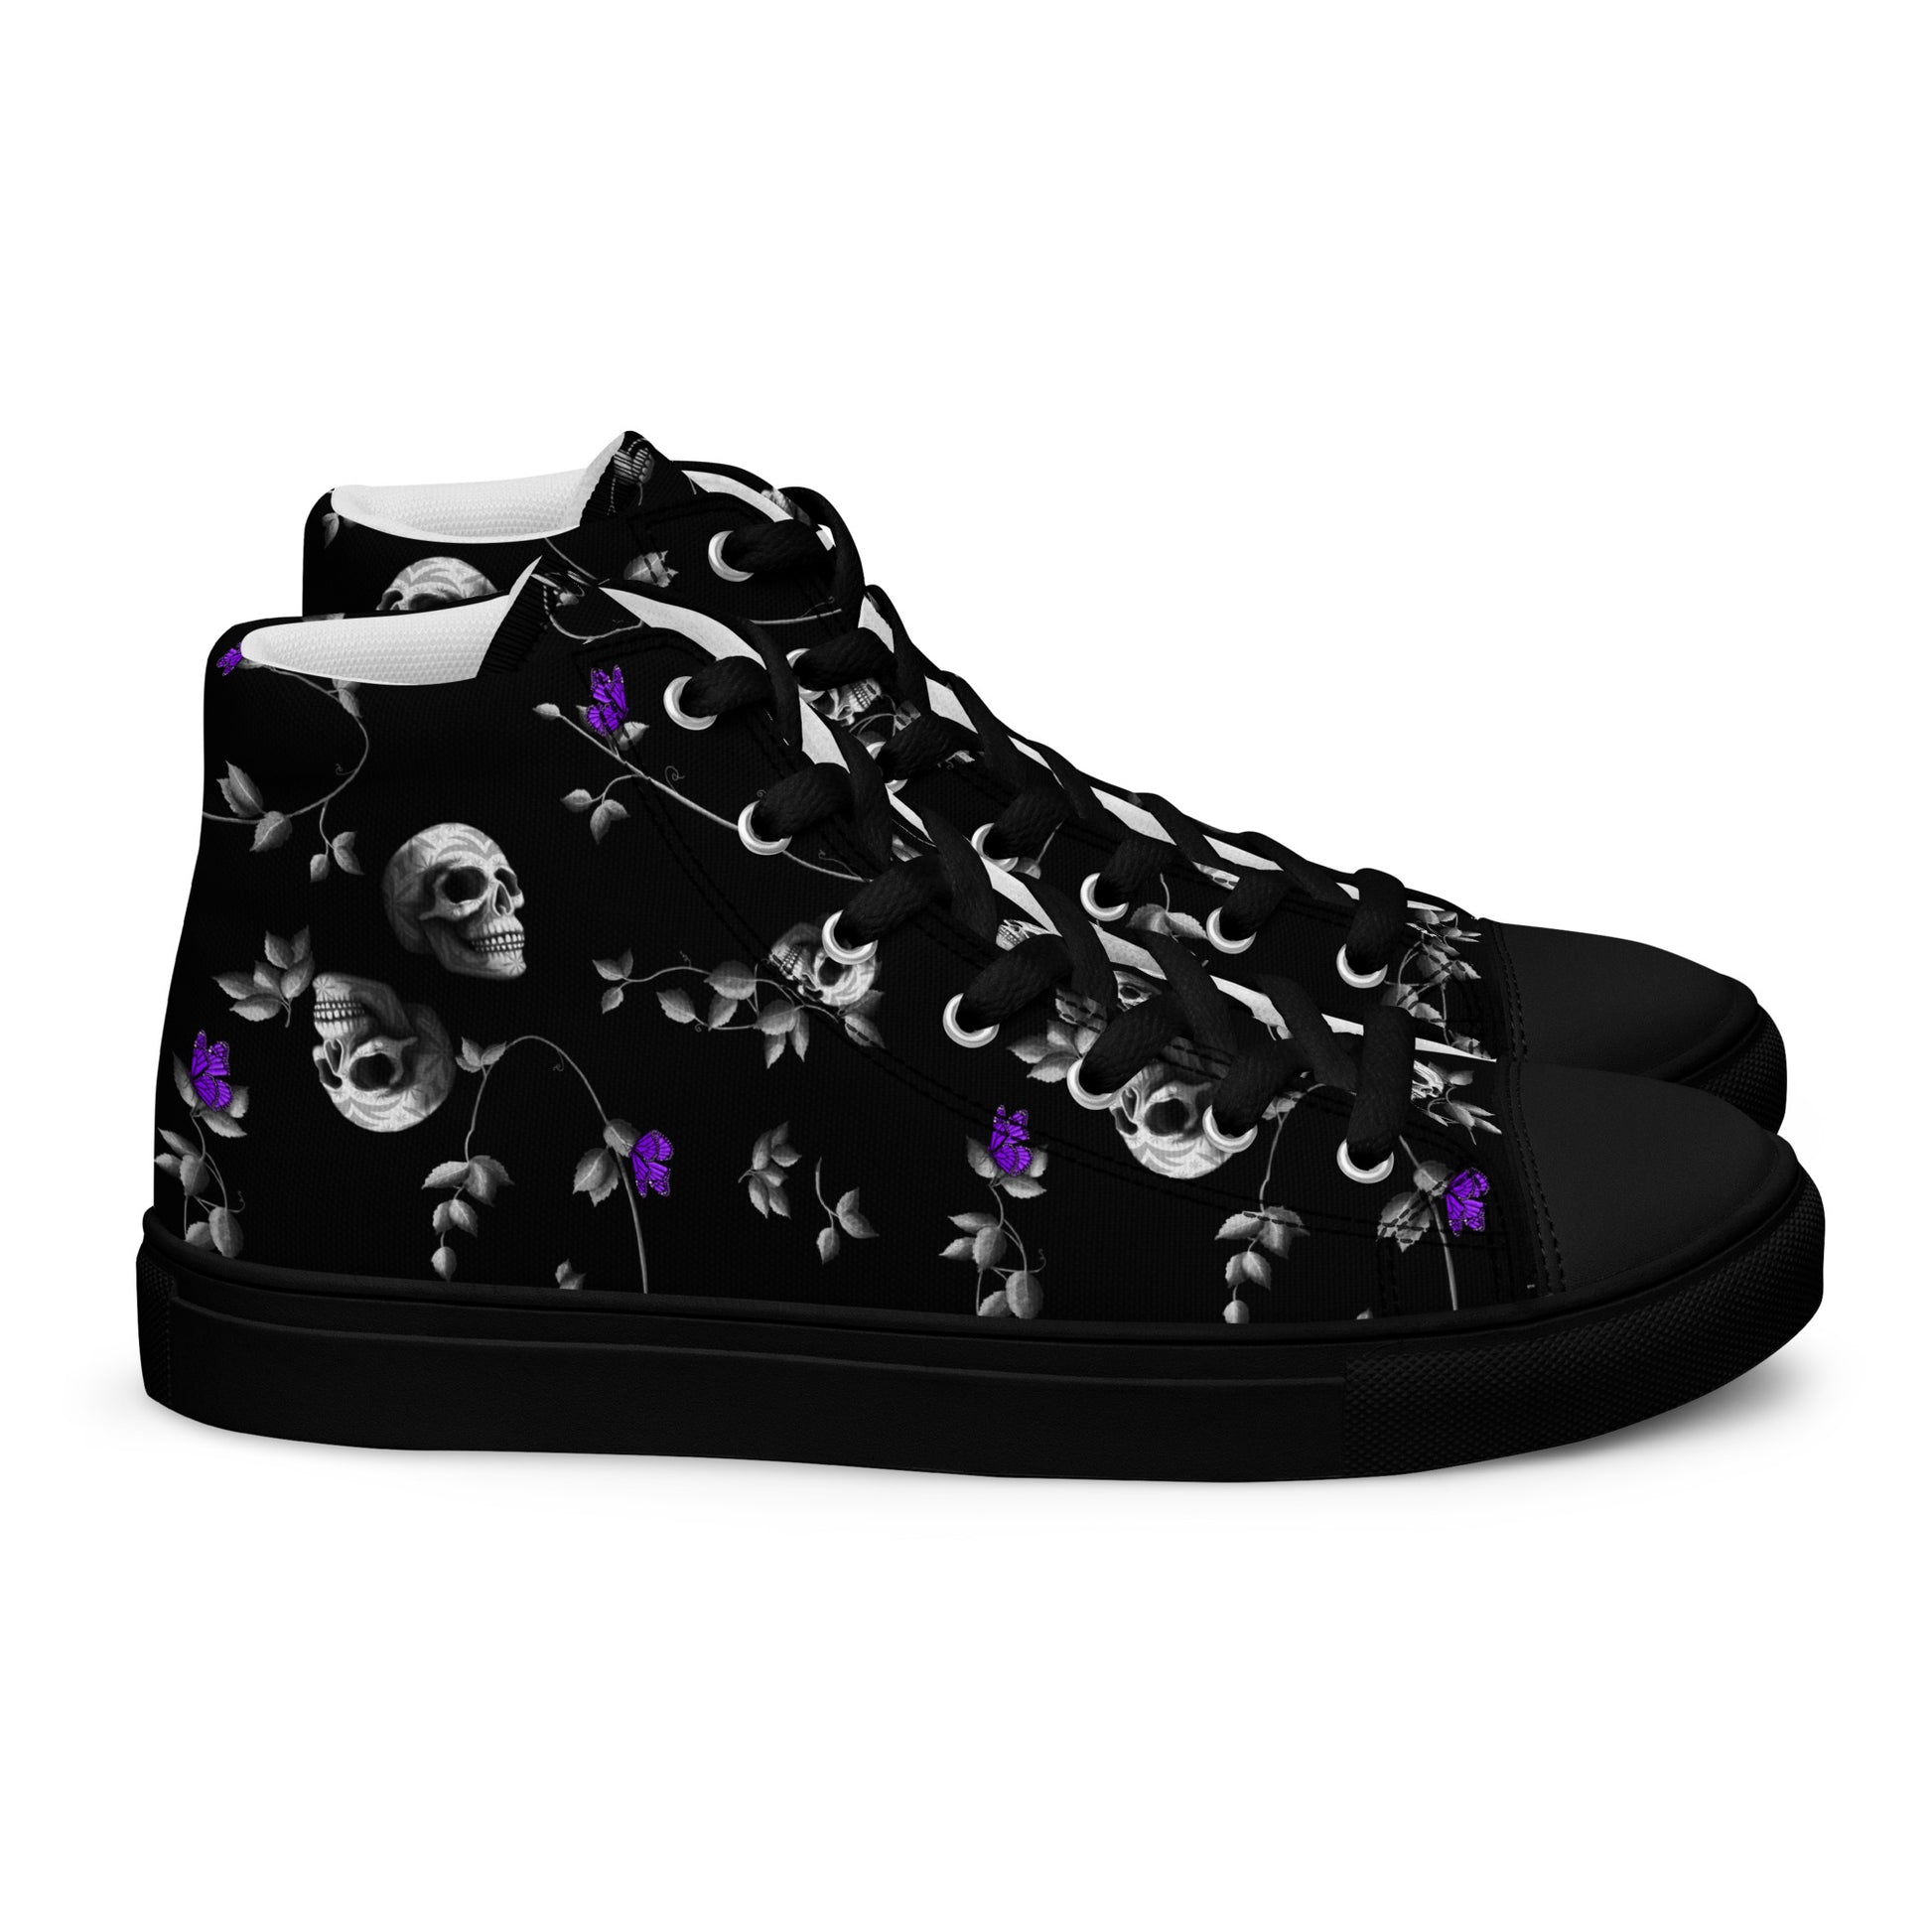 Stormseye Design Gothic Skulls high top shoes, black sole, side view